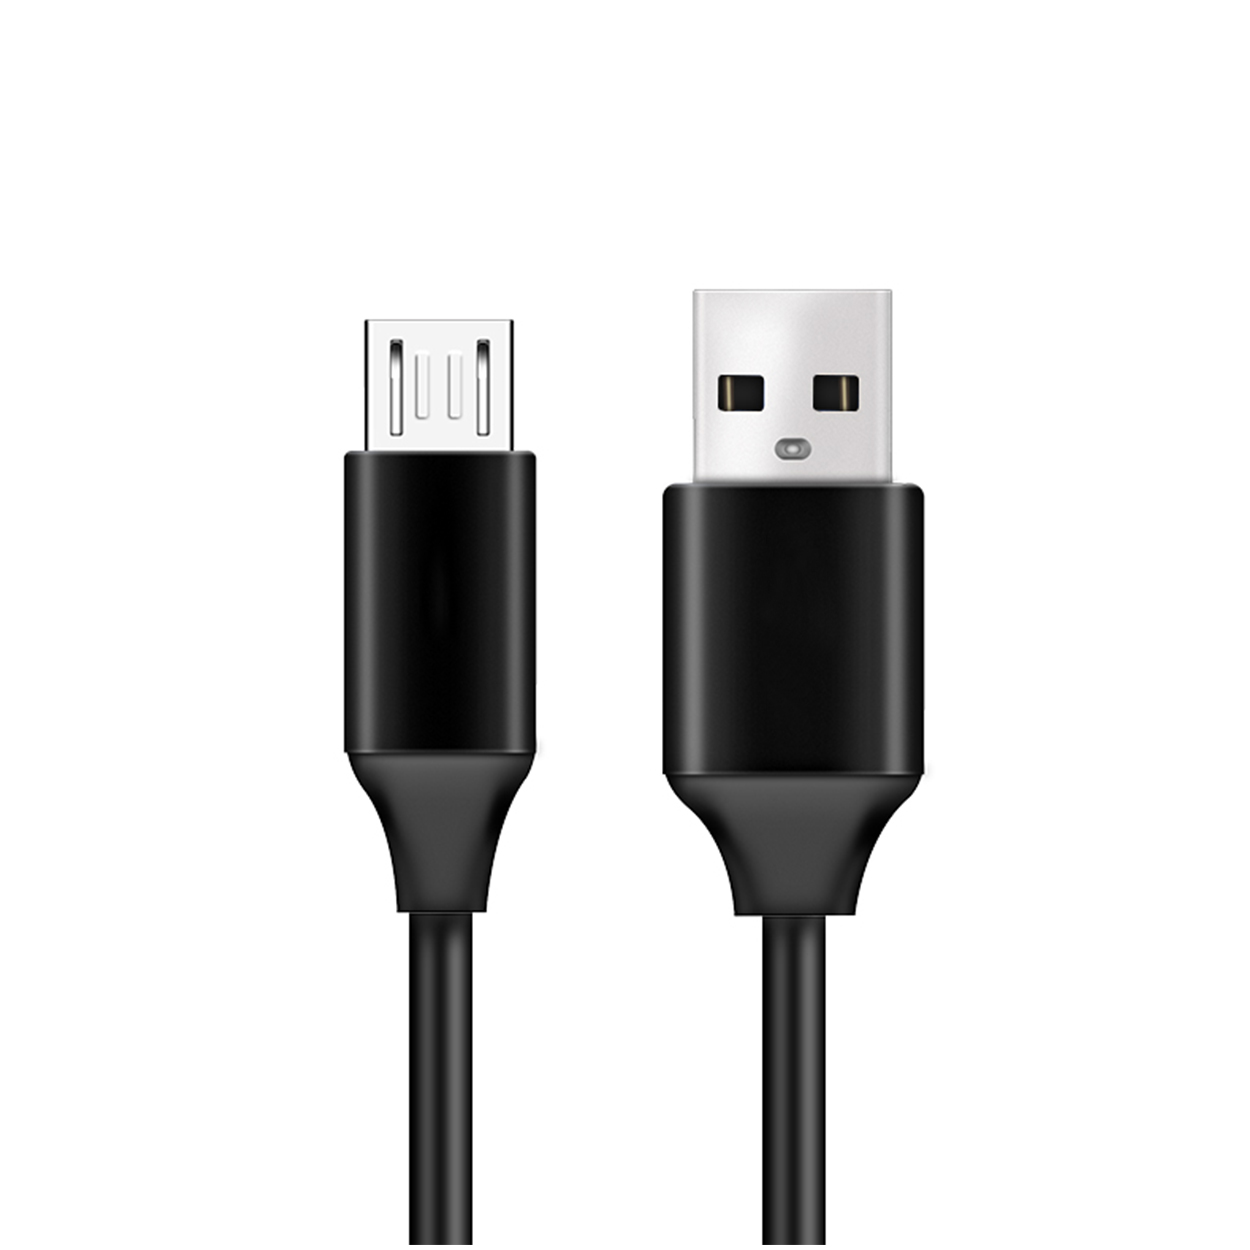 Bakeey-Type-C-USB-Fast-Charging-Data-Cable-025m-1m-For-Samsung-S8-Letv-10-Pro-Huawei-1639181